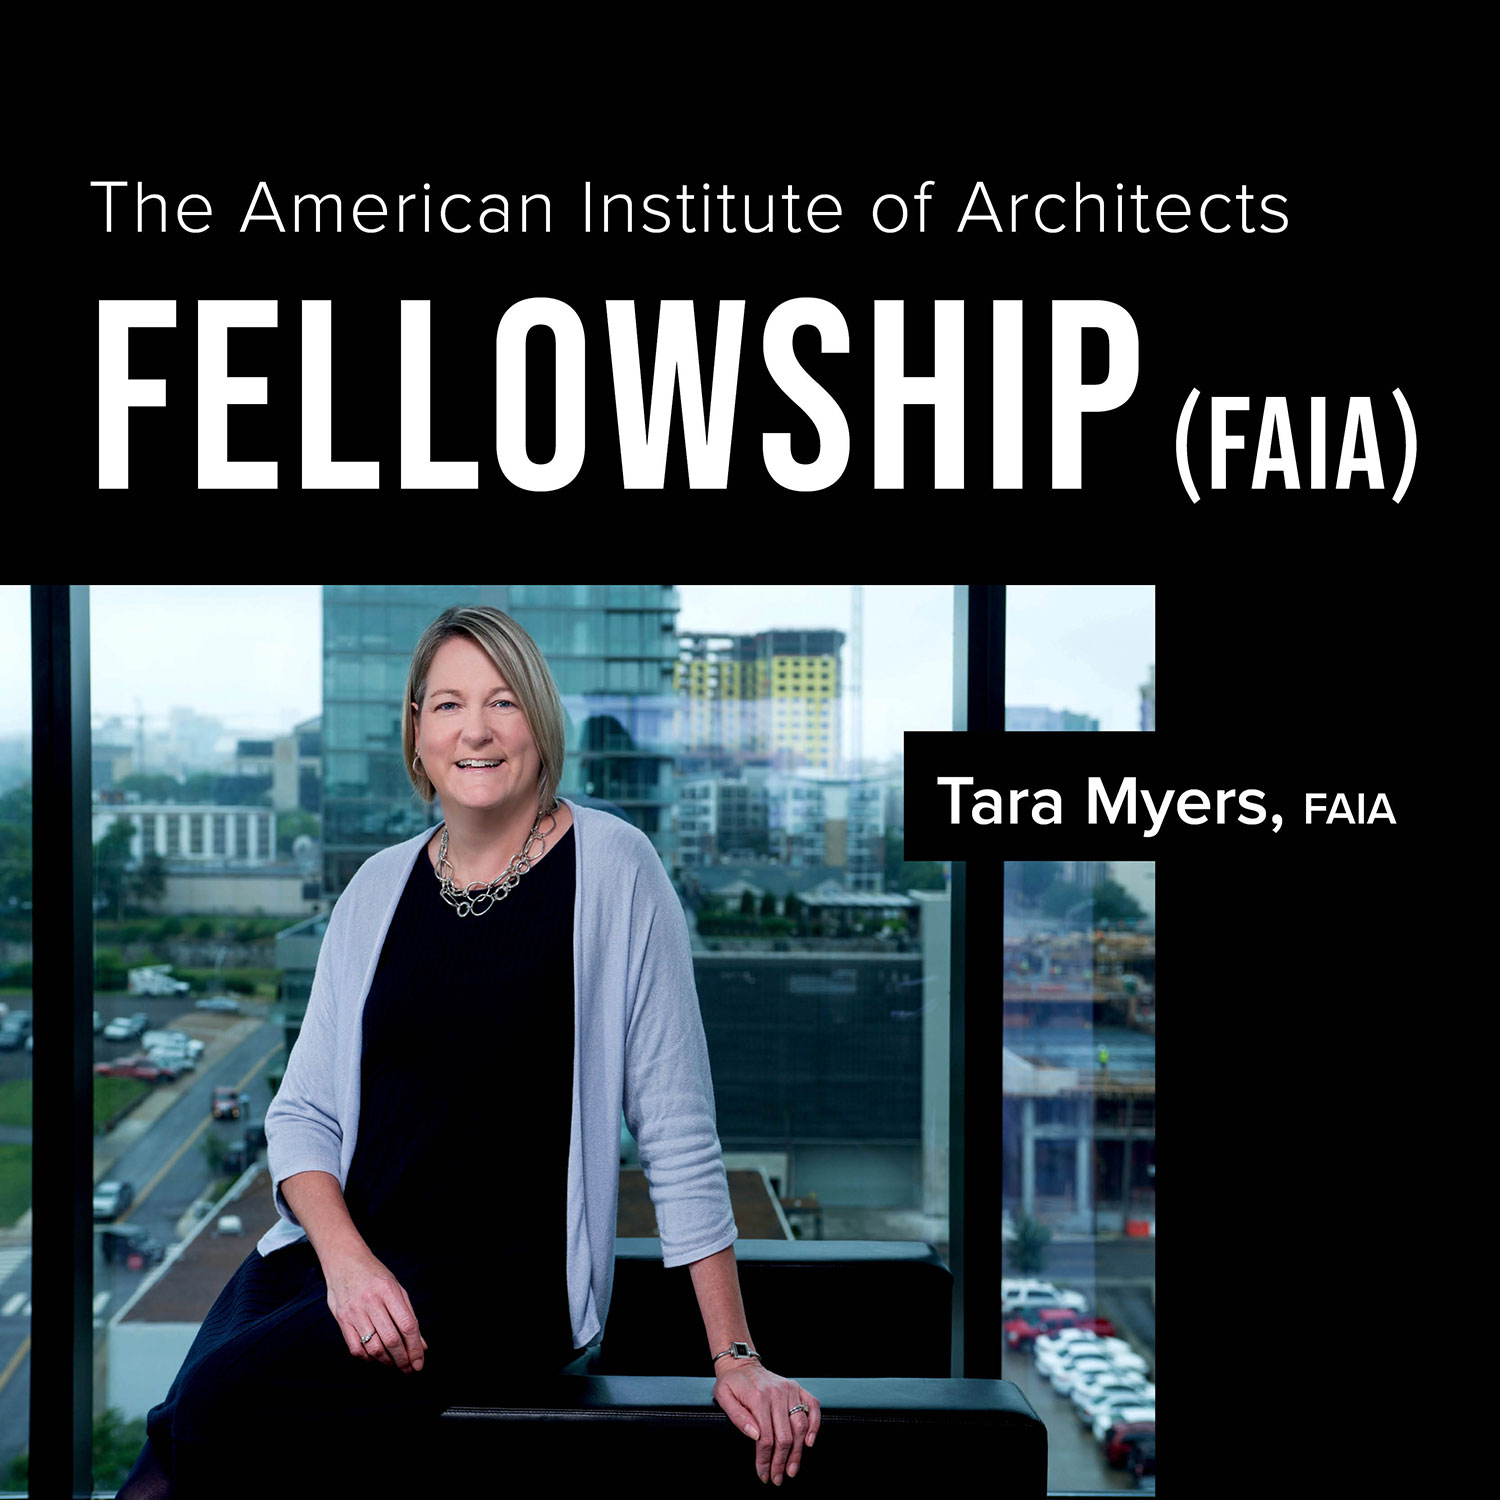 ESa’s Tara Myers elevated to The American Institute of Architects (AIA) College of Fellows